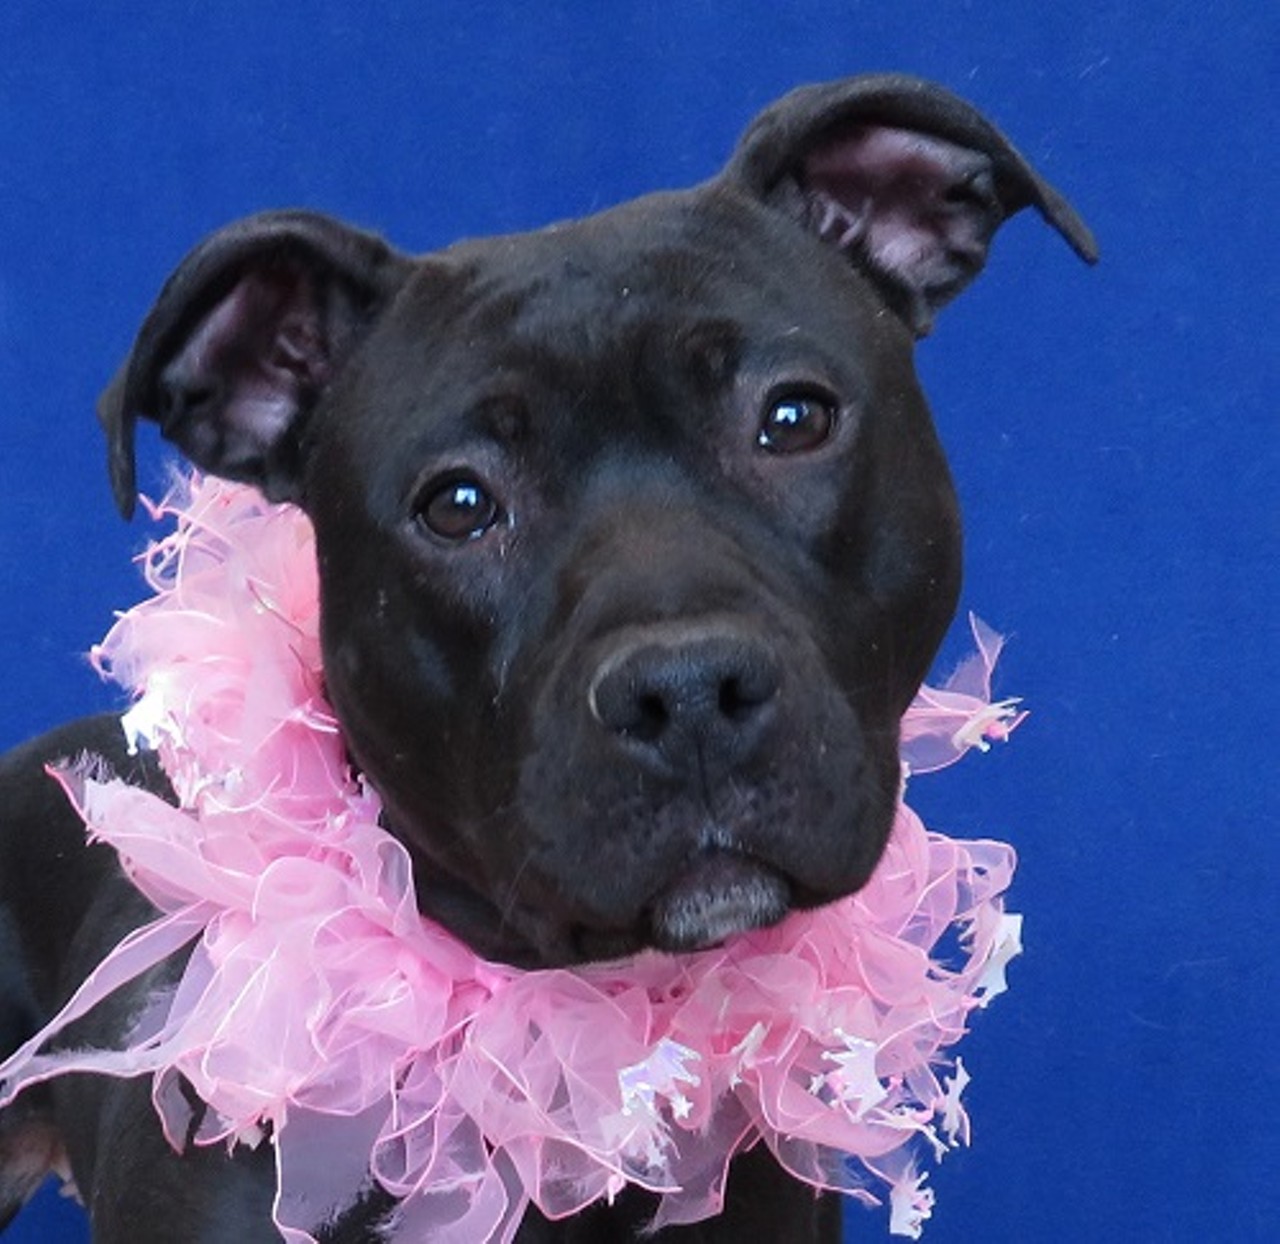 NAME: Avianna
GENDER: Female 
BREED: Pit Bull 
AGE: 3 years, 1 month 
WEIGHT: 36 pounds 
SPECIAL CONSIDERATIONS: None 
REASON I CAME TO MHS: Rescued in Detroit
LOCATION: Petco of Sterling Heights
ID NUMBER: 866059